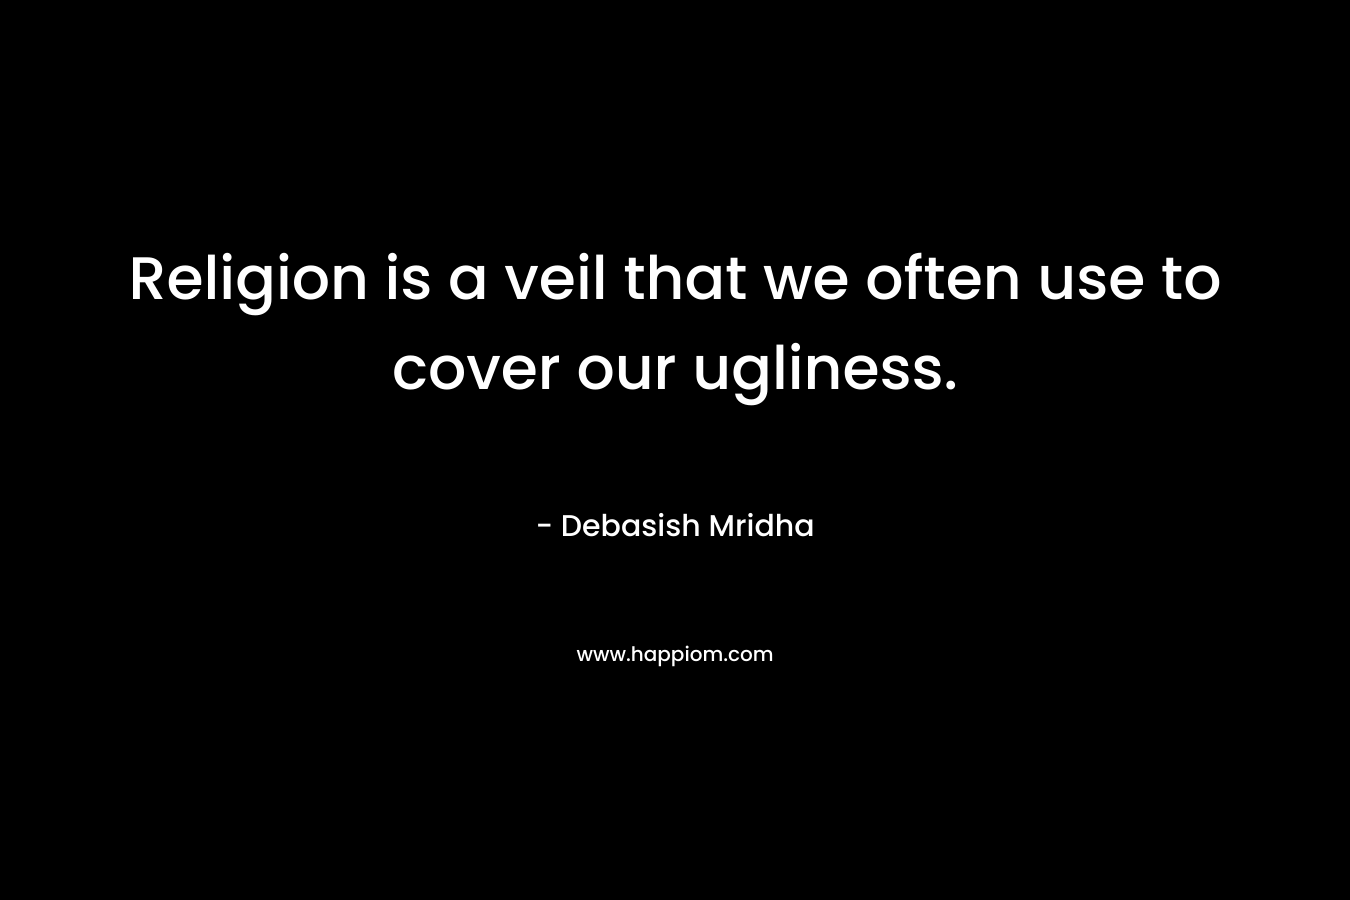 Religion is a veil that we often use to cover our ugliness. – Debasish Mridha